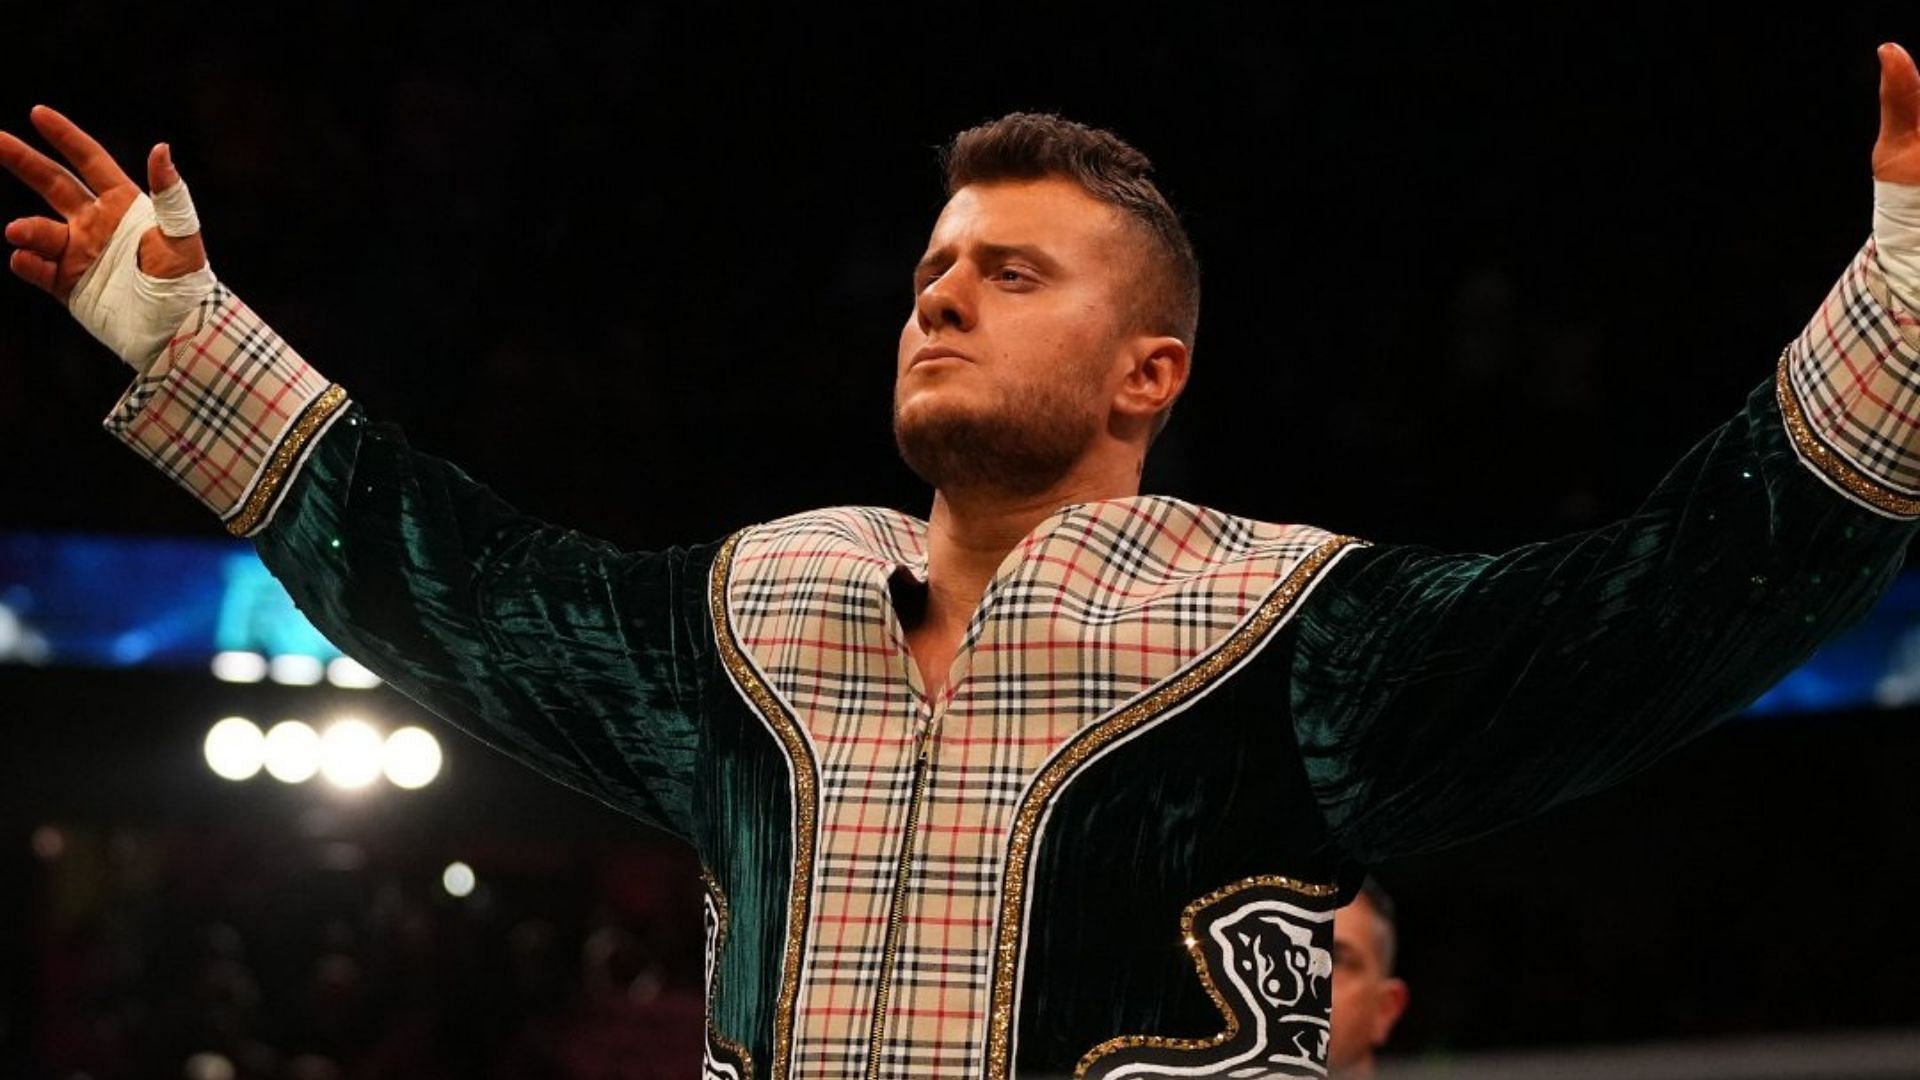 MJF before his match at AEW Revolution 2022